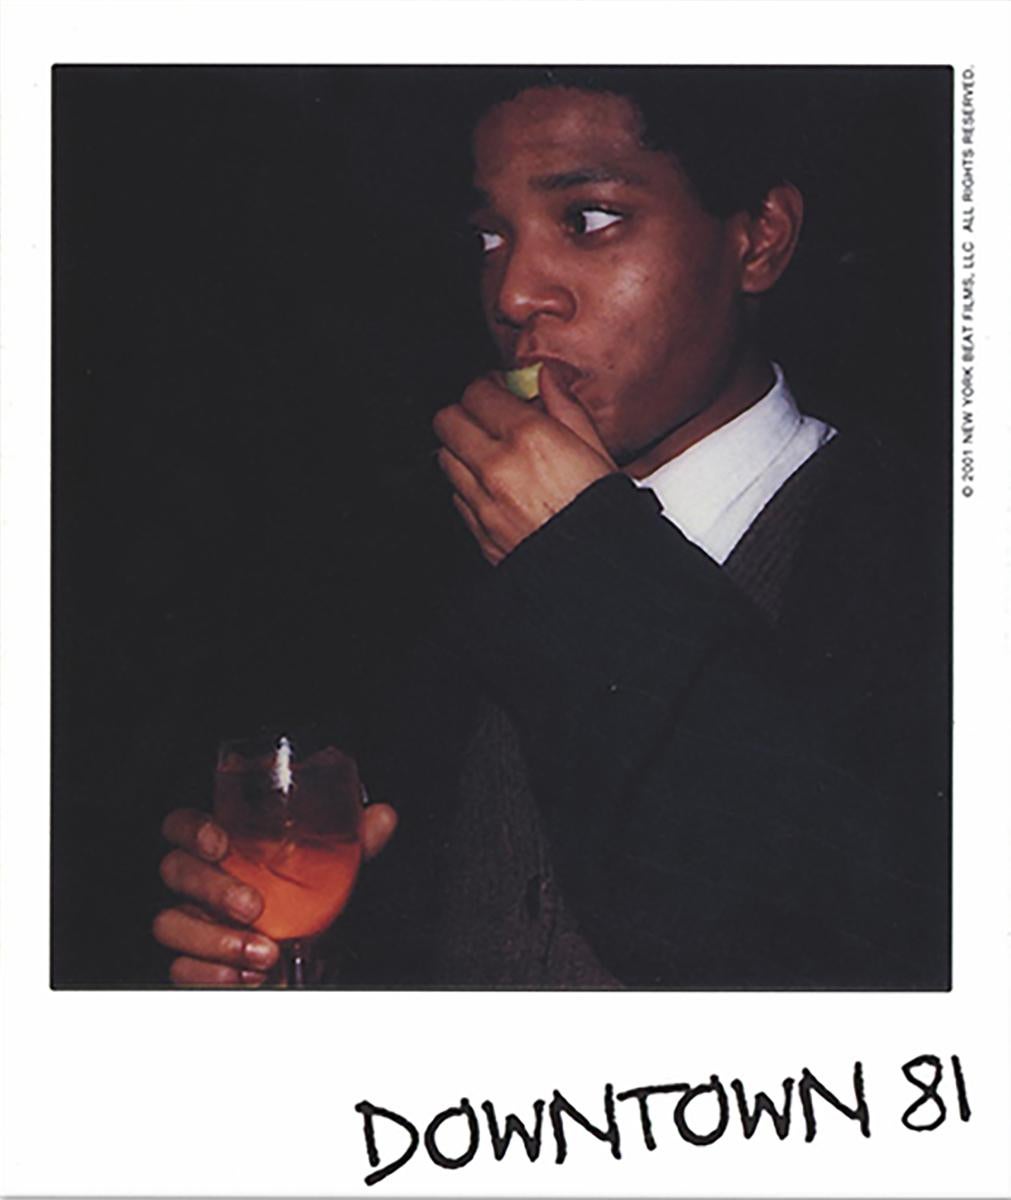 Figurative Print after Jean-Michel Basquiat - Collection Basquiat Downtown 81 (Basquiat, 1981 : The Studio of the Street) 